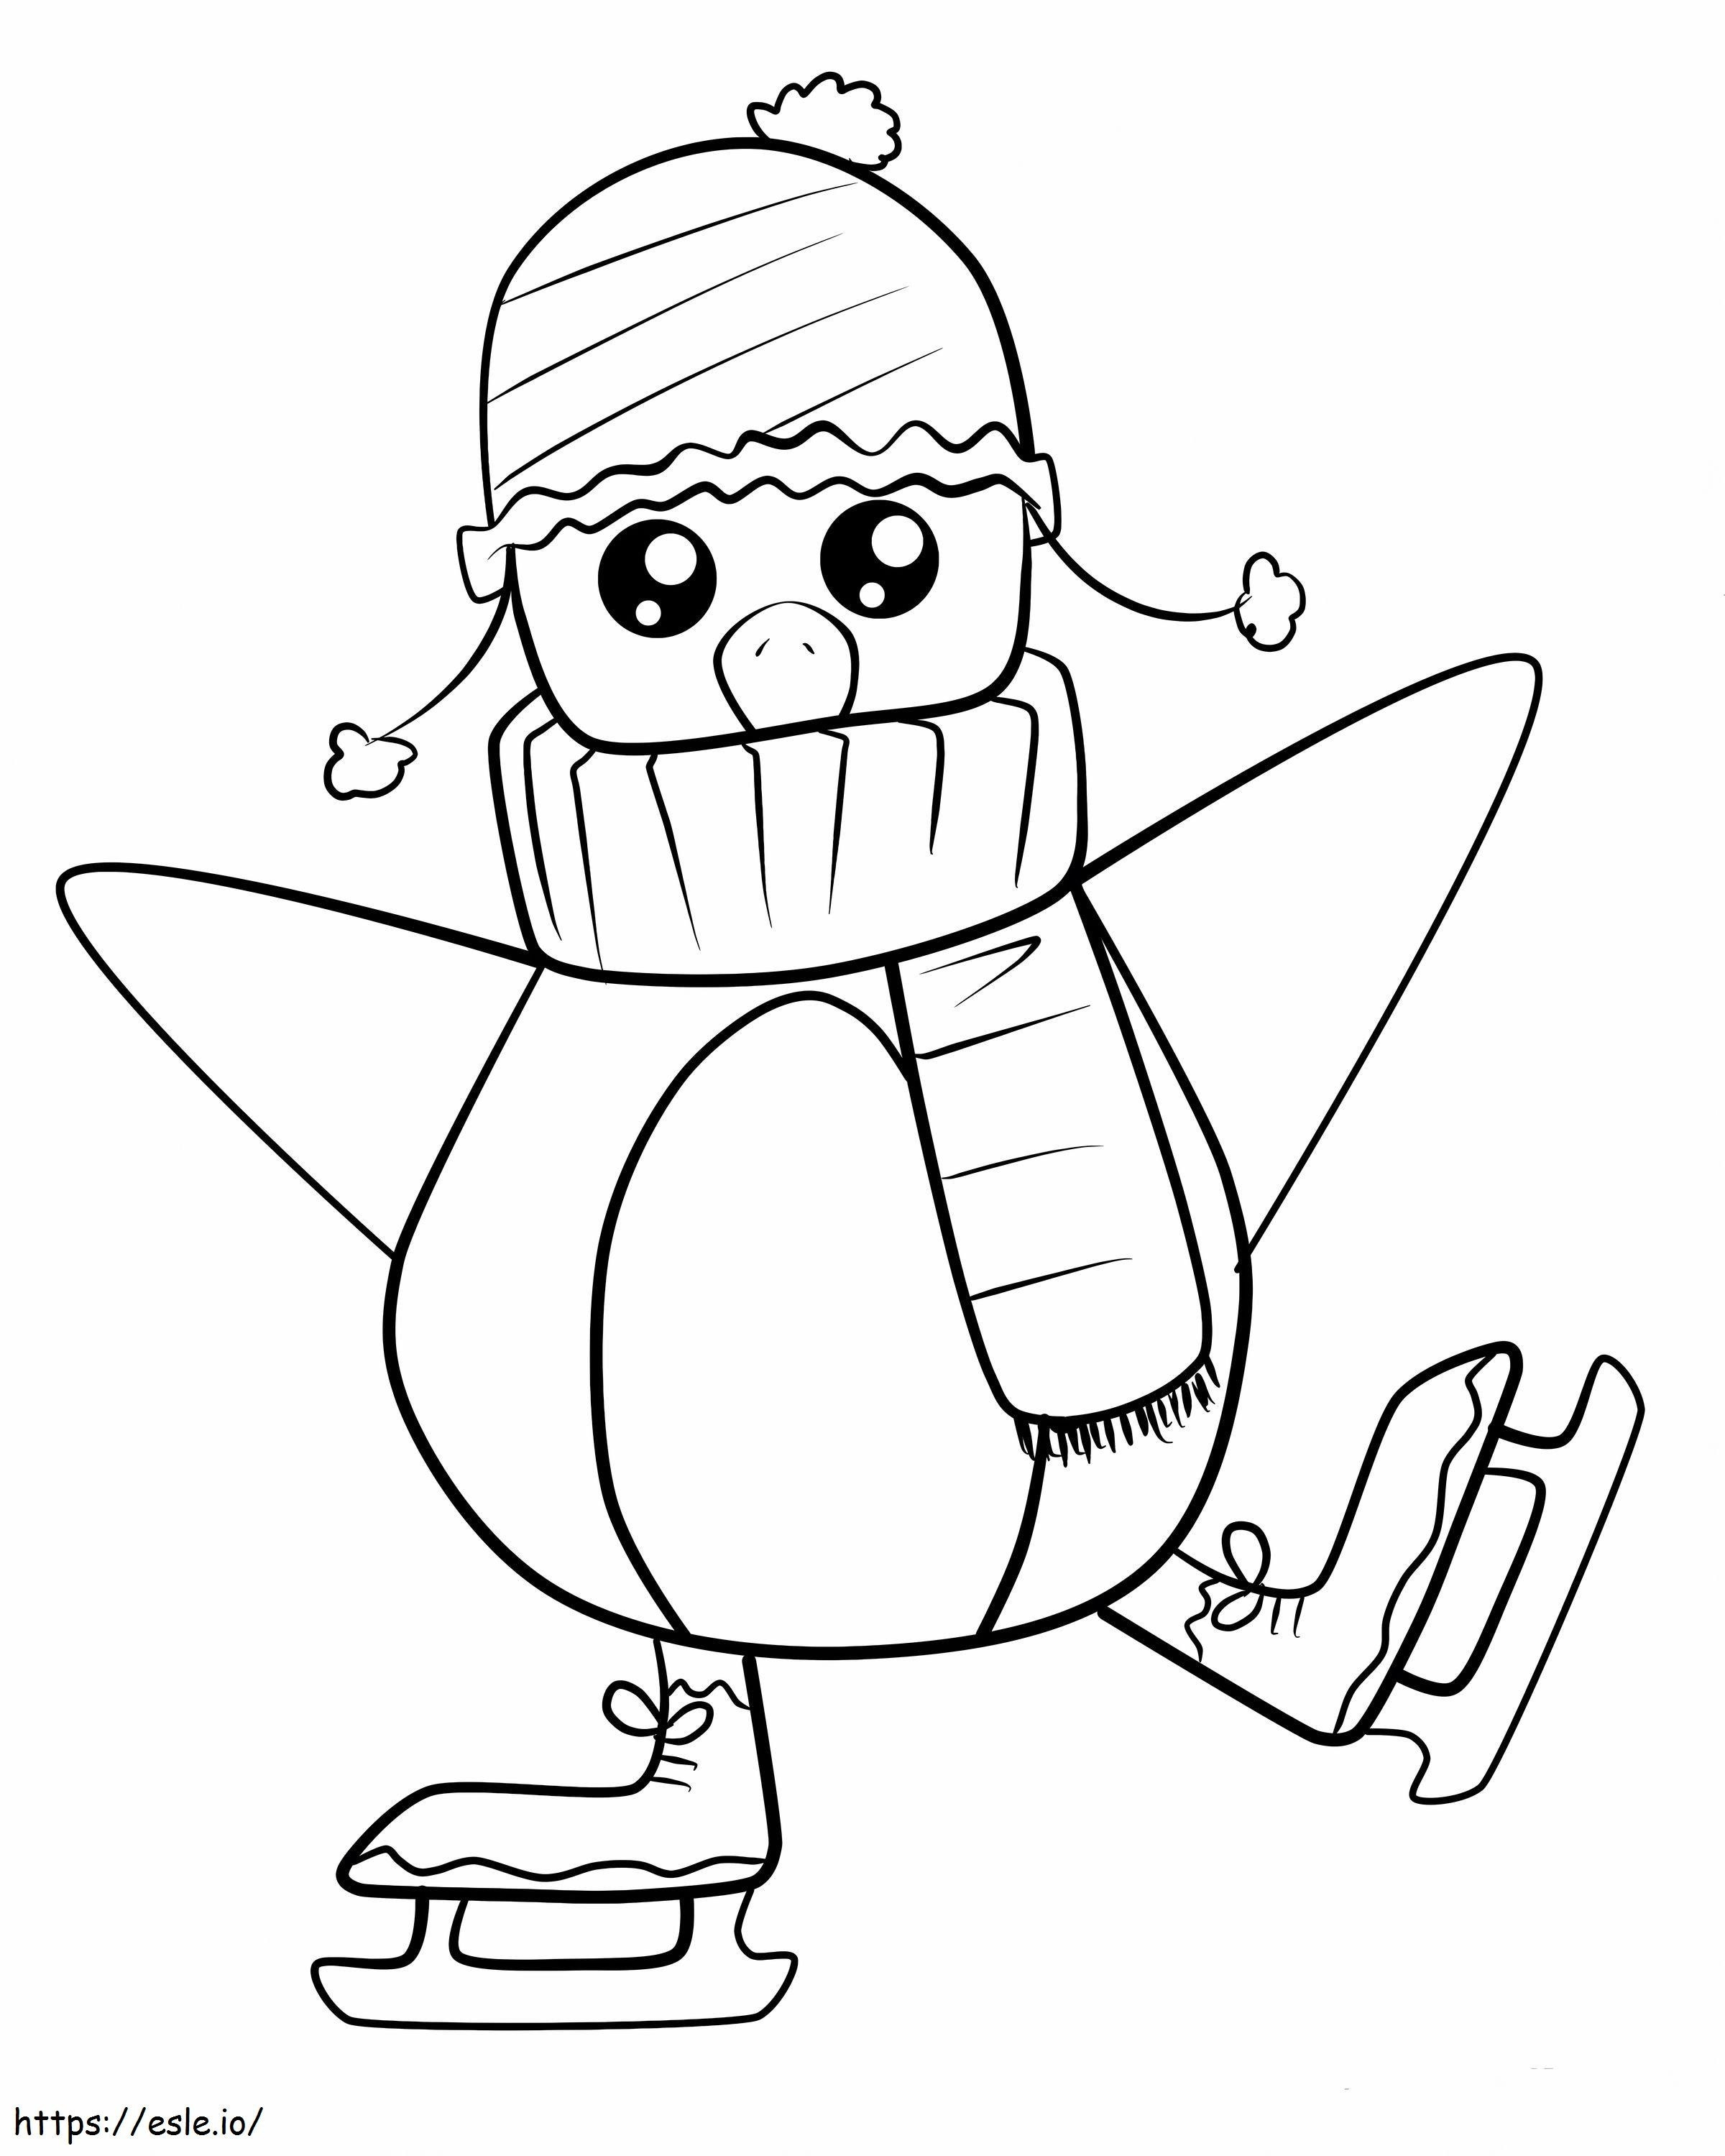 1544403022_Picture Christmas Hunting 4 Perfect Ideas Cute Astonishing Penguin Page Scaled coloring page